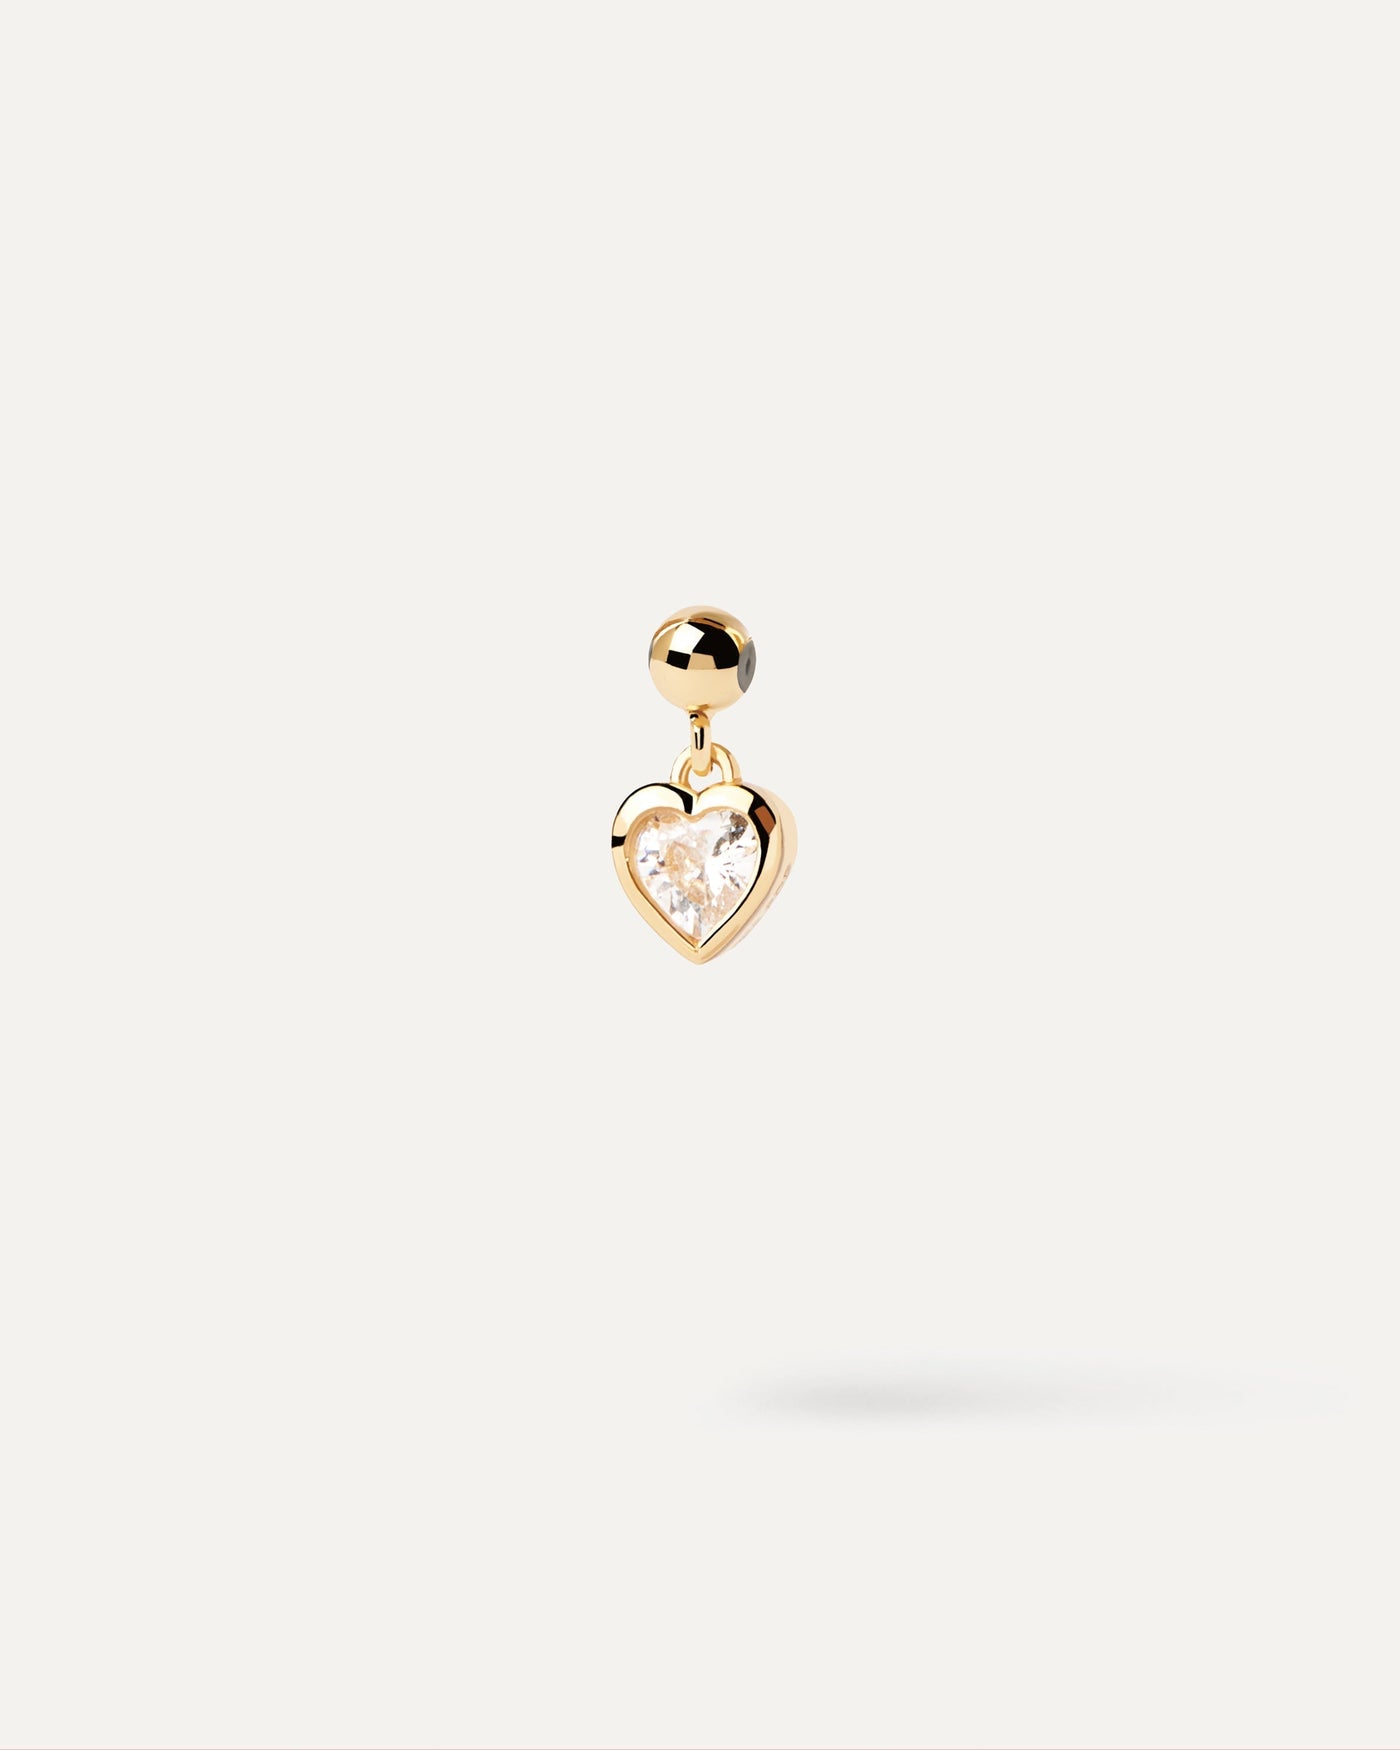 2023 Selection | Mini Heart Charm. Get the latest arrival from PDPAOLA. Place your order safely and get this Best Seller. Free Shipping.